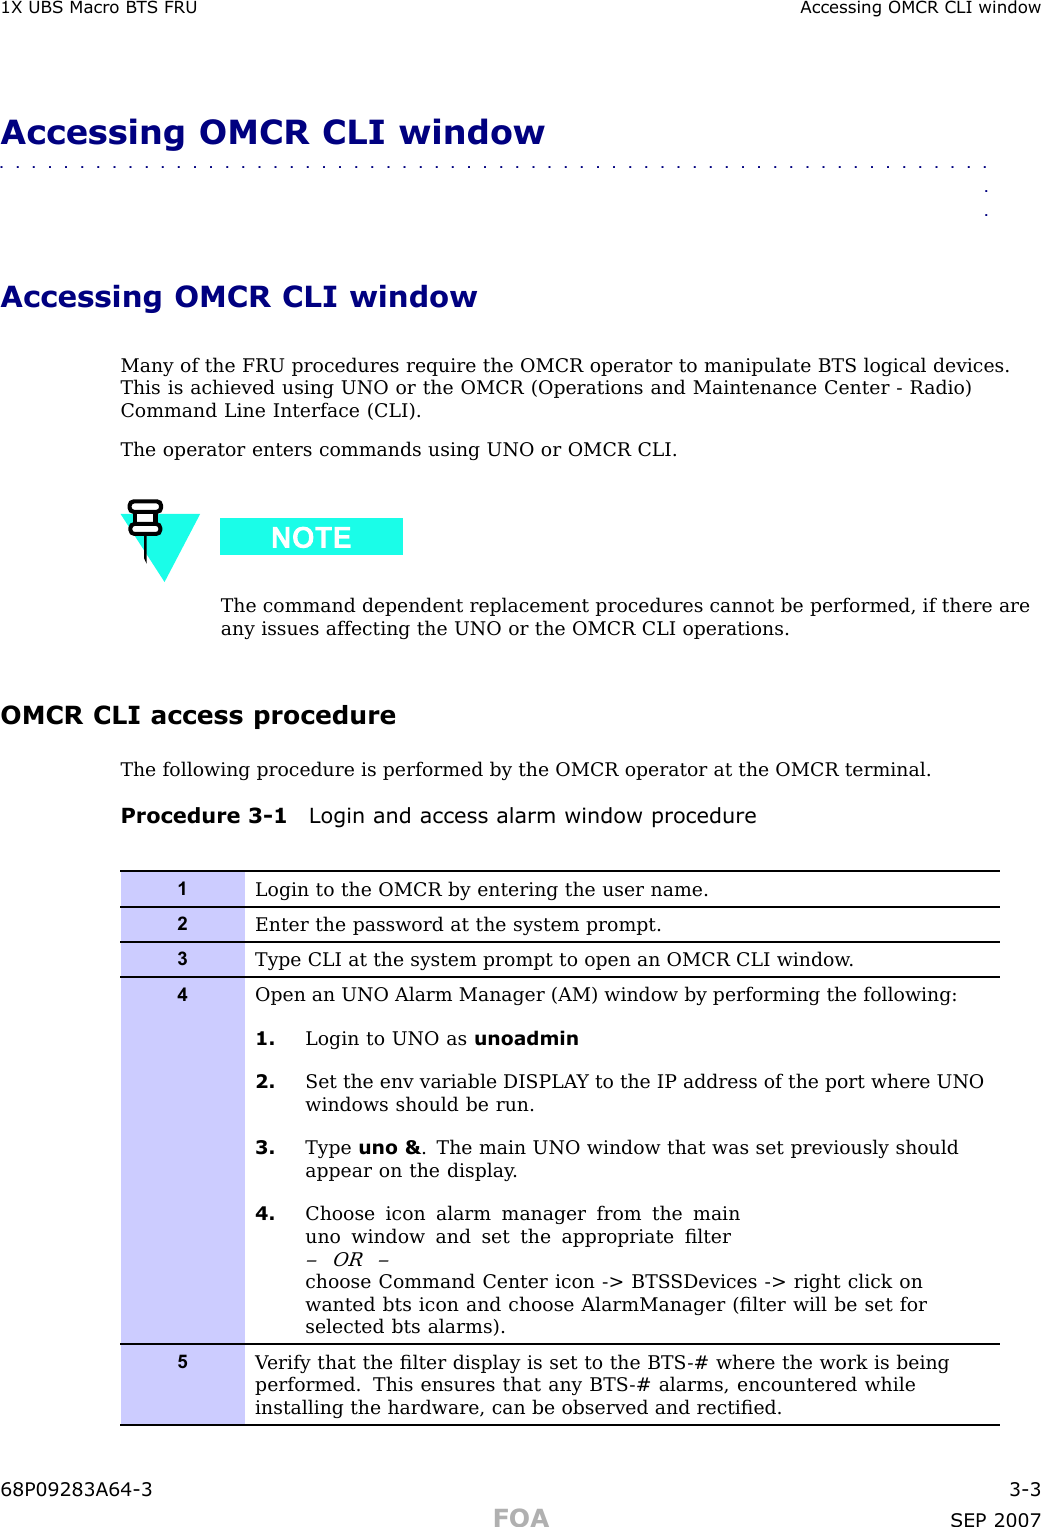 1X UBS Macro B T S FRU Accessing OMCR CLI windowAccessing OMCR CLI window■■■■■■■■■■■■■■■■■■■■■■■■■■■■■■■■■■■■■■■■■■■■■■■■■■■■■■■■■■■■■■■■Accessing OMCR CLI windowMany of the FRU procedures require the OMCR operator to manipulate BTS logical devices.This is achieved using UNO or the OMCR (Operations and Maintenance Center - R adio)Command Line Interface (CLI).The operator enters commands using UNO or OMCR CLI.The command dependent replacement procedures cannot be performed, if there areany issues affecting the UNO or the OMCR CLI operations.OMCR CLI access procedureThe following procedure is performed by the OMCR operator at the OMCR terminal.Procedure 3 -1 Login and access alarm window procedure1Login to the OMCR by entering the user name.2Enter the password at the system prompt.3Type CLI at the system prompt to open an OMCR CLI window .4Open an UNO Alarm Manager (AM) window by performing the following:1. Login to UNO as unoadmin2. Set the env variable DISPLA Y to the IP address of the port where UNOwindows should be run.3. Type uno &amp; . The main UNO window that was set previously shouldappear on the display .4. Choose icon alarm manager from the mainuno window and set the appropriate ﬁlter– OR –choose Command Center icon -&gt; BTS SDevices -&gt; right click onwanted bts icon and choose AlarmManager (ﬁlter will be set forselected bts alarms).5V erify that the ﬁlter display is set to the BTS -# where the work is beingperformed. This ensures that any BTS -# alarms, encountered whileinstalling the hardware, can be observed and rectiﬁed.68P09283A64 -3 3 -3FOA SEP 2007